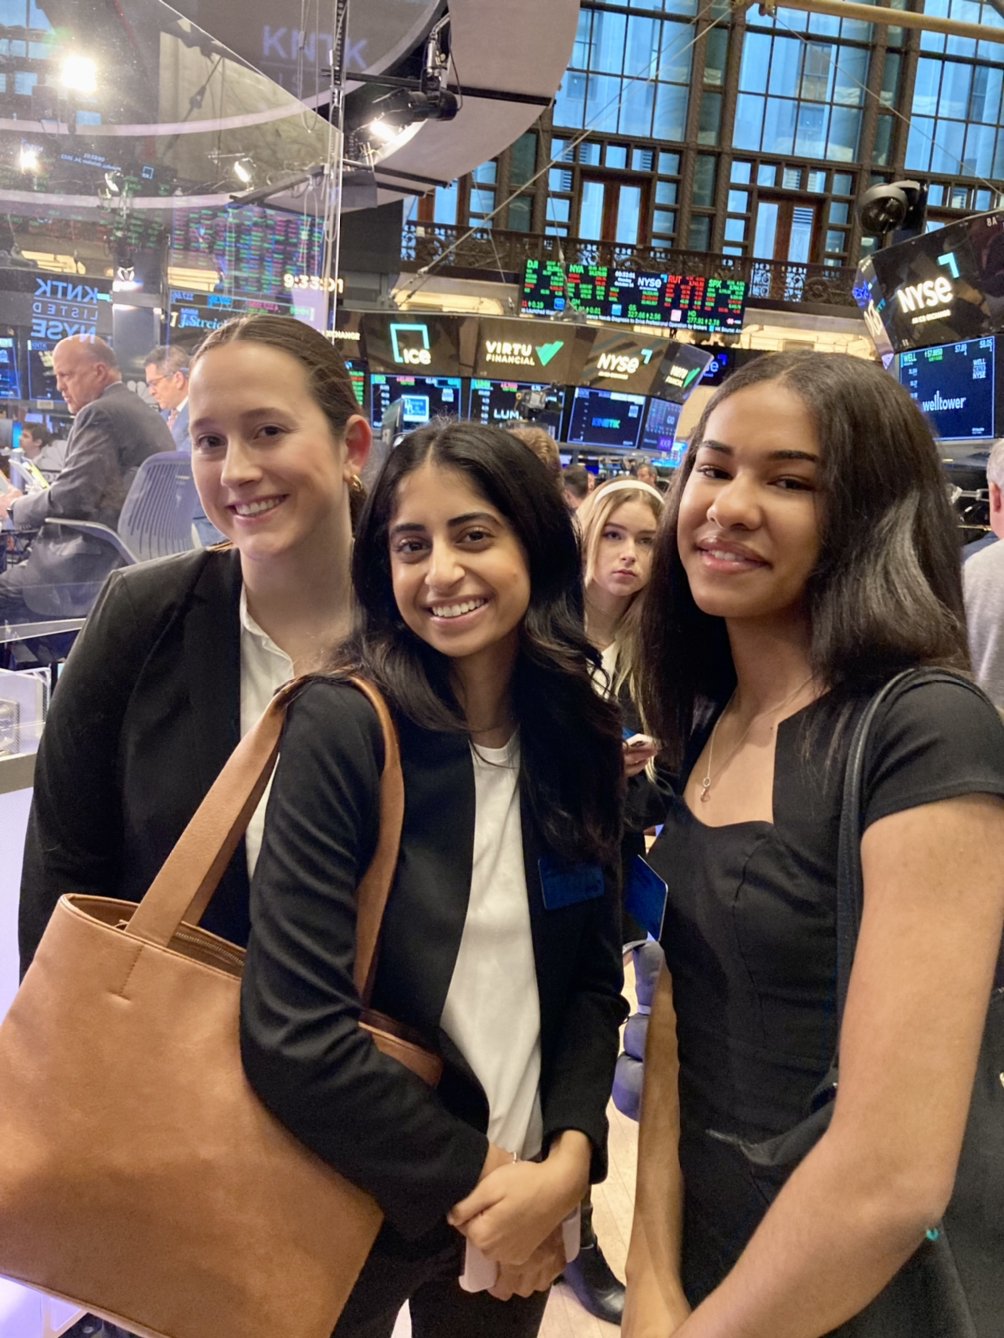 From left to right, students Sarah Jackson, Ashima Dhawan, and Karyne Brown had the special opportunity to walk the floor of the NYSE during trading hours.